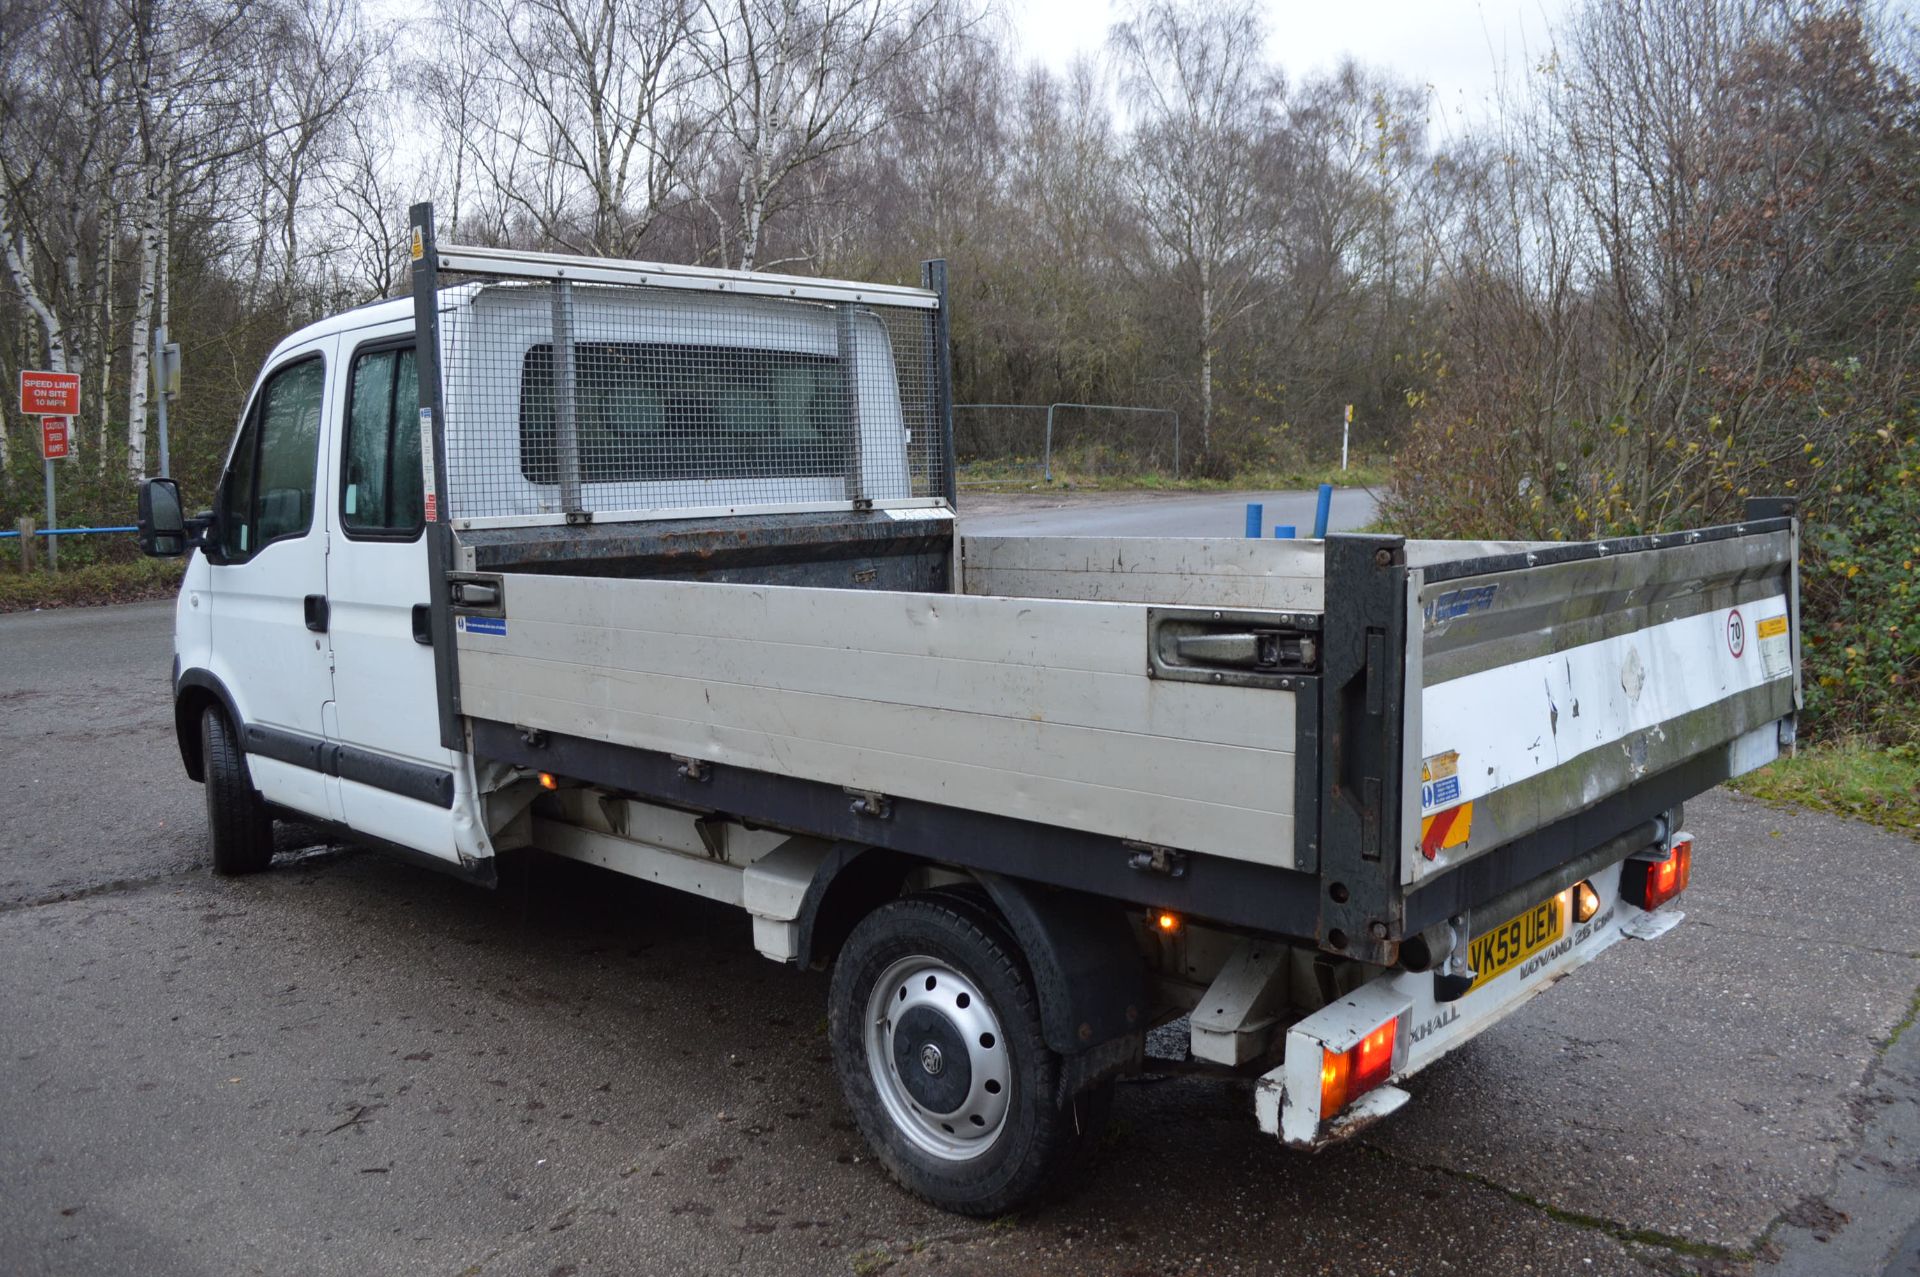 2009/59 REG VAUXHALL MOVANO 3500 CDTI LWB DOUBLE CAB TIPPER, SHOWING 2 FORMER KEEPERS *NO VAT* - Image 4 of 18